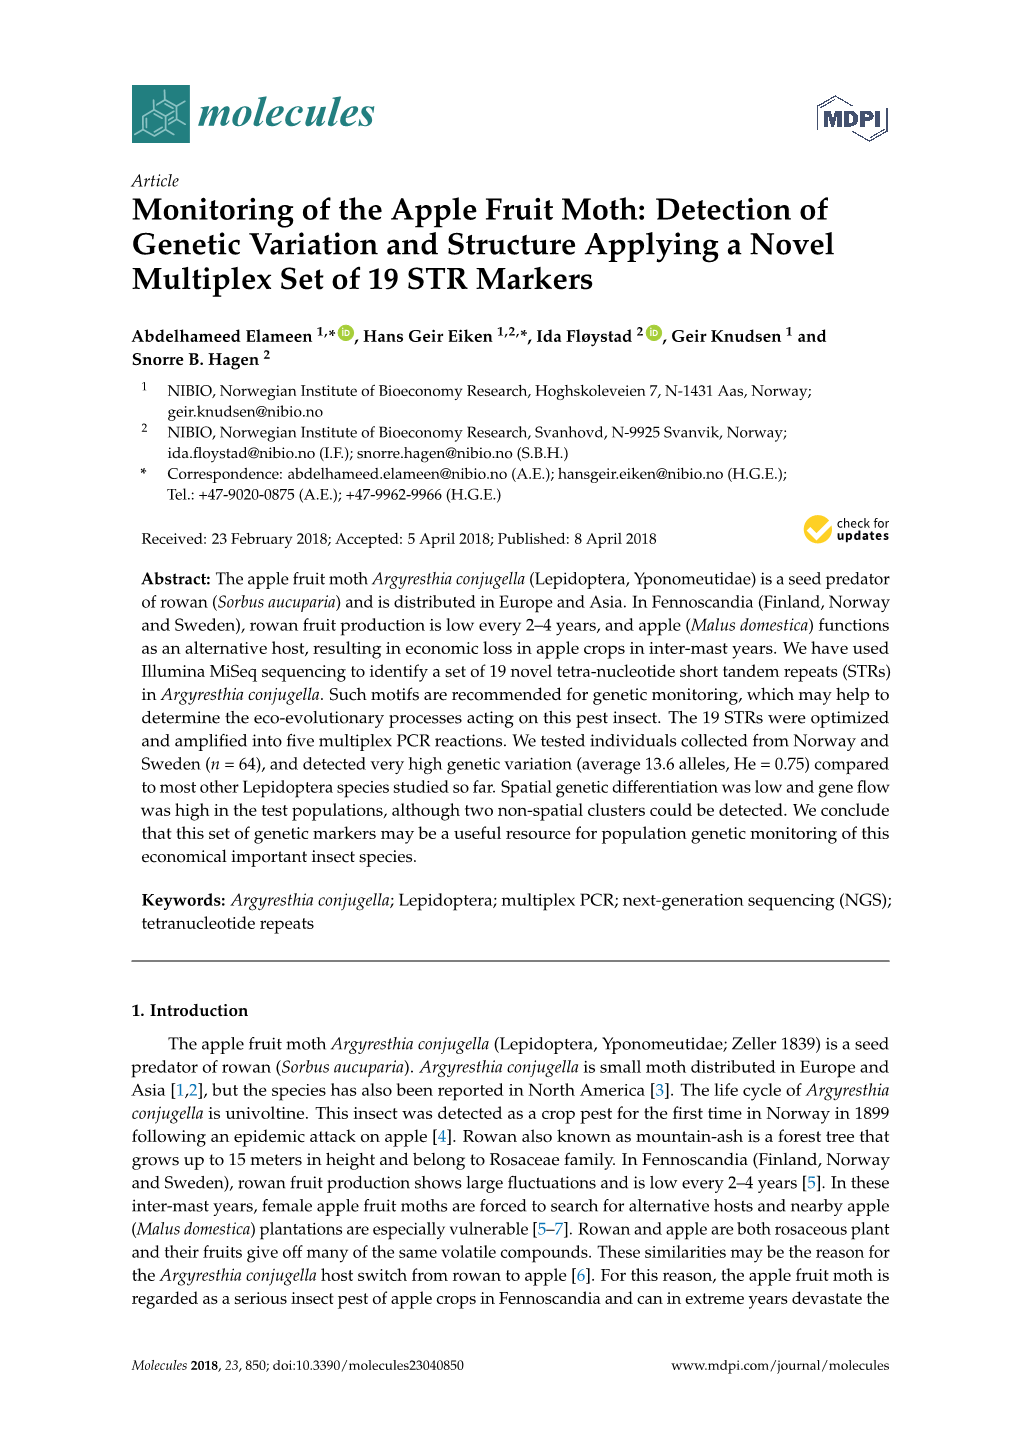 Monitoring of the Apple Fruit Moth: Detection of Genetic Variation and Structure Applying a Novel Multiplex Set of 19 STR Markers